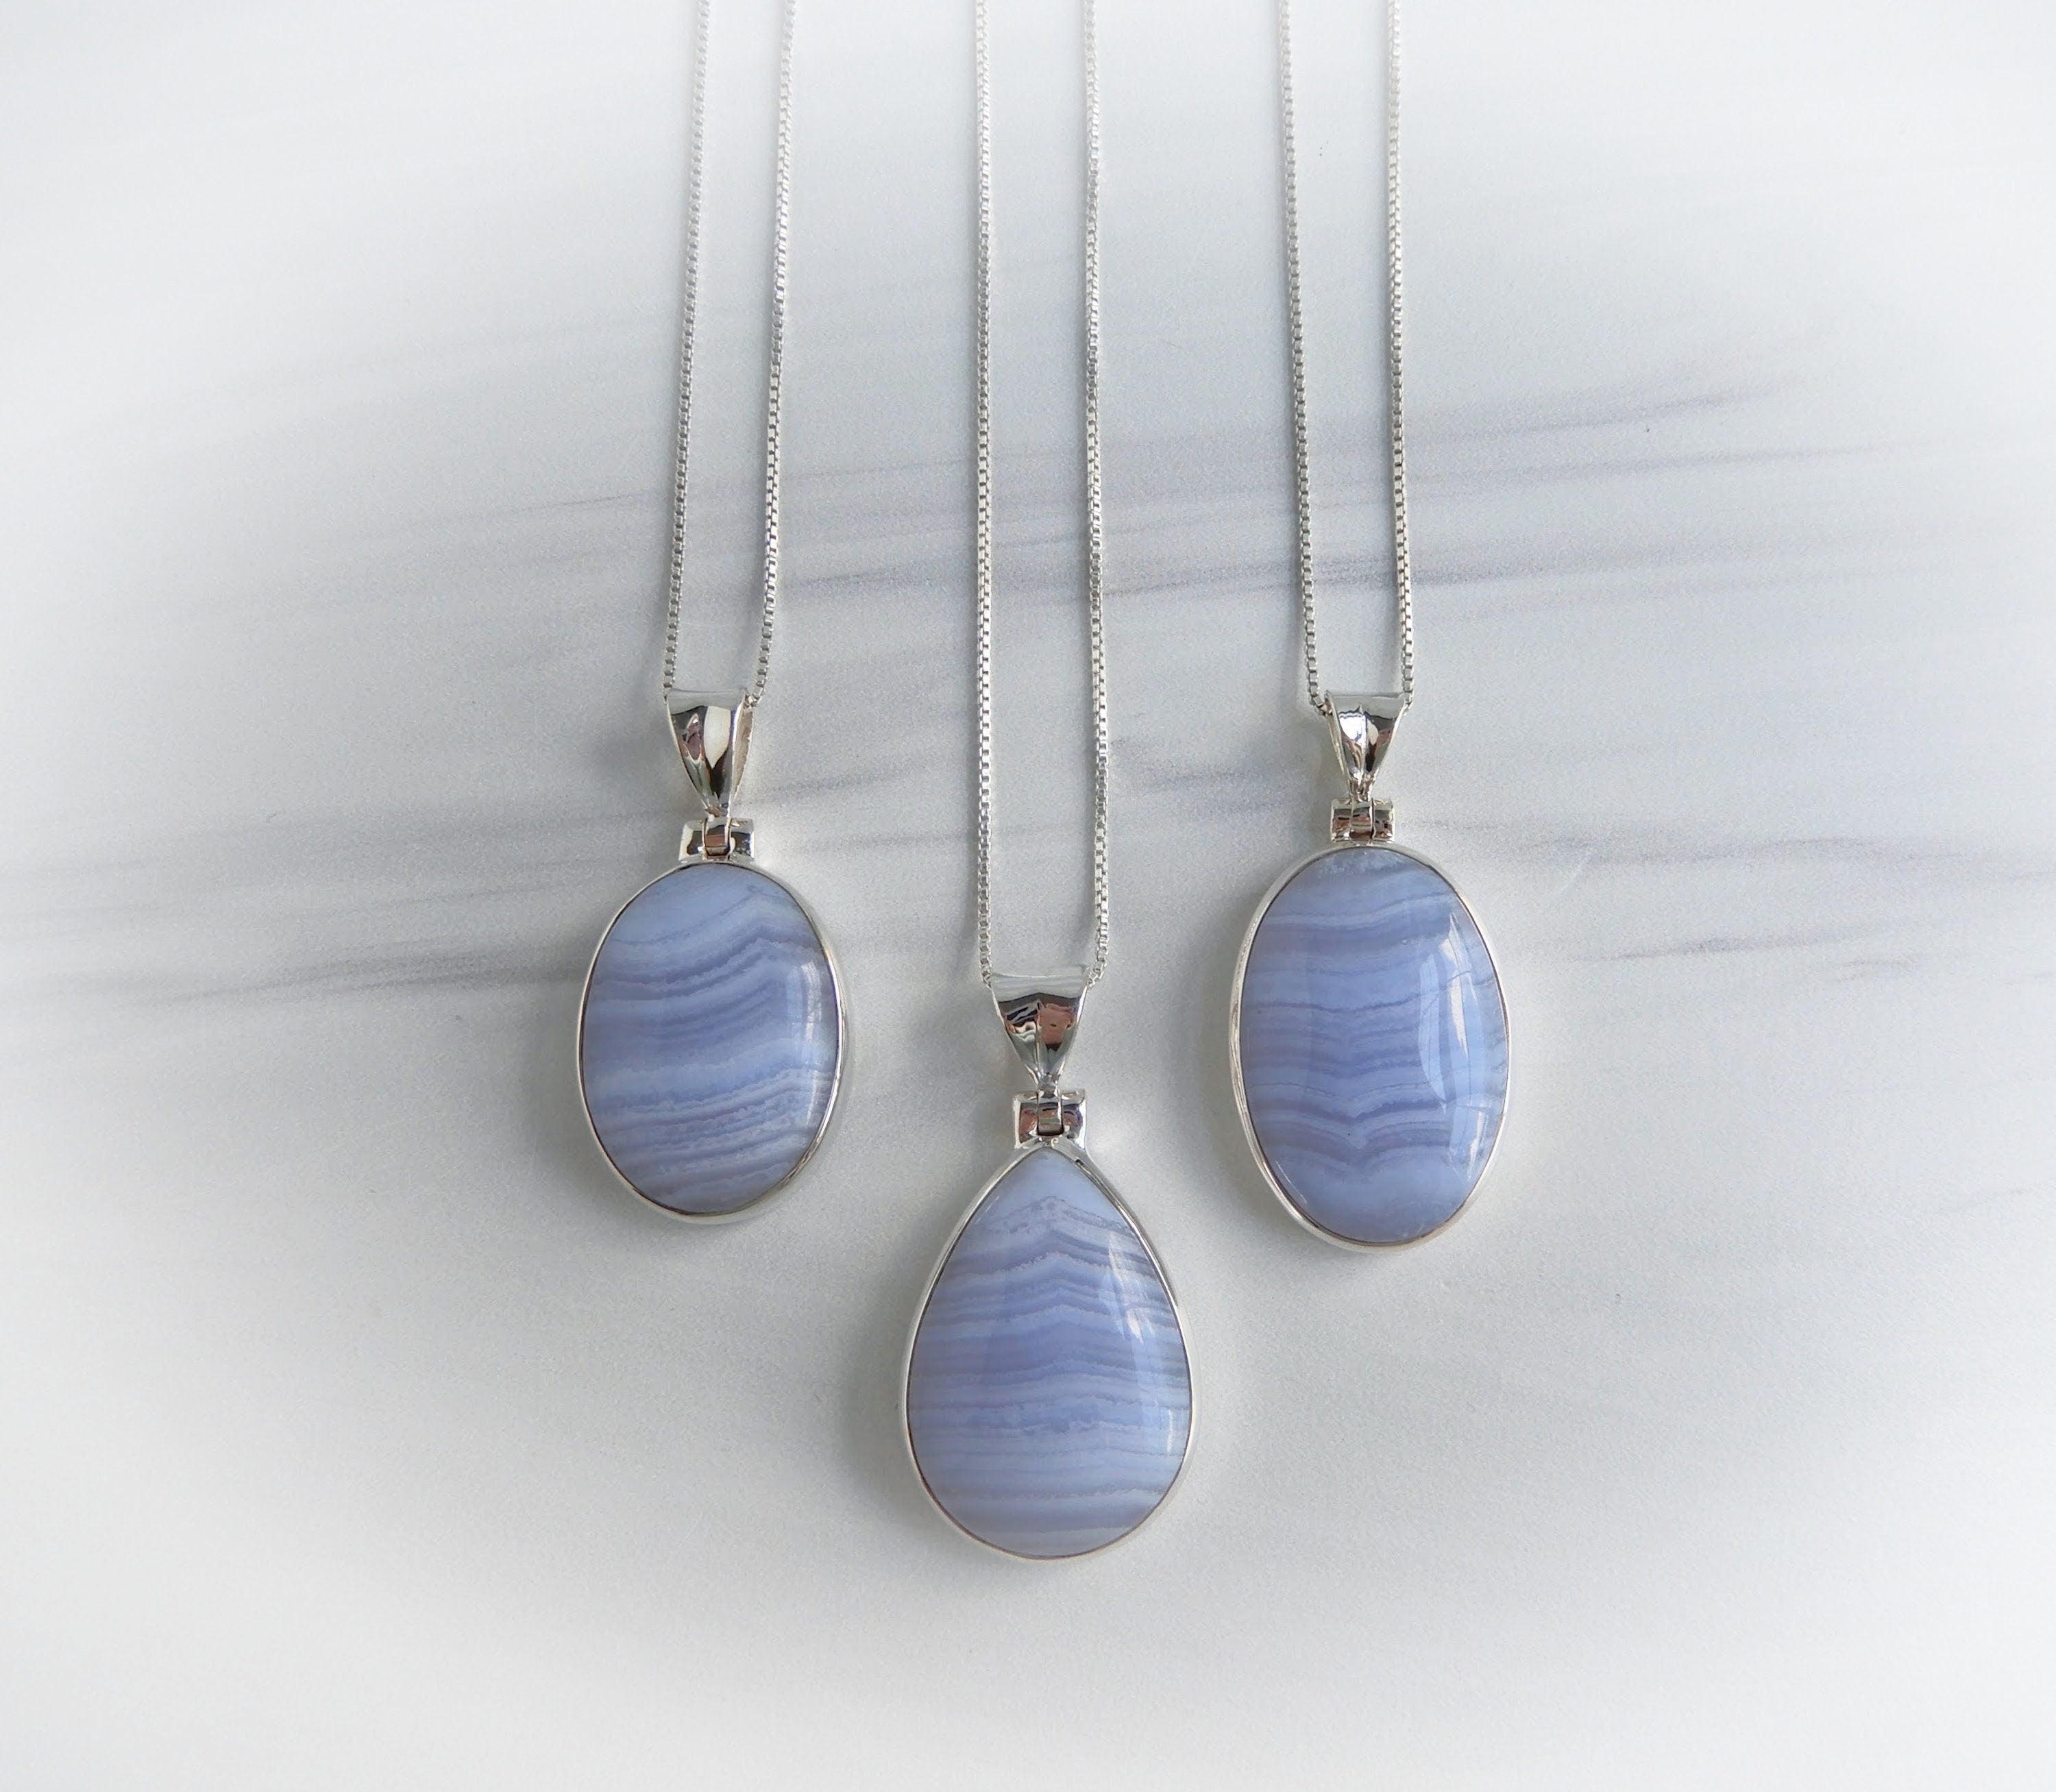 This Stunning Blue Lace Agate Necklace is created by wire wrapping  together, Sterling Silver wire, Sterling Silver jump rings, Swarovski  Crystals & beaded gemstones to form the necklace. Stone: 30mm x 25mm